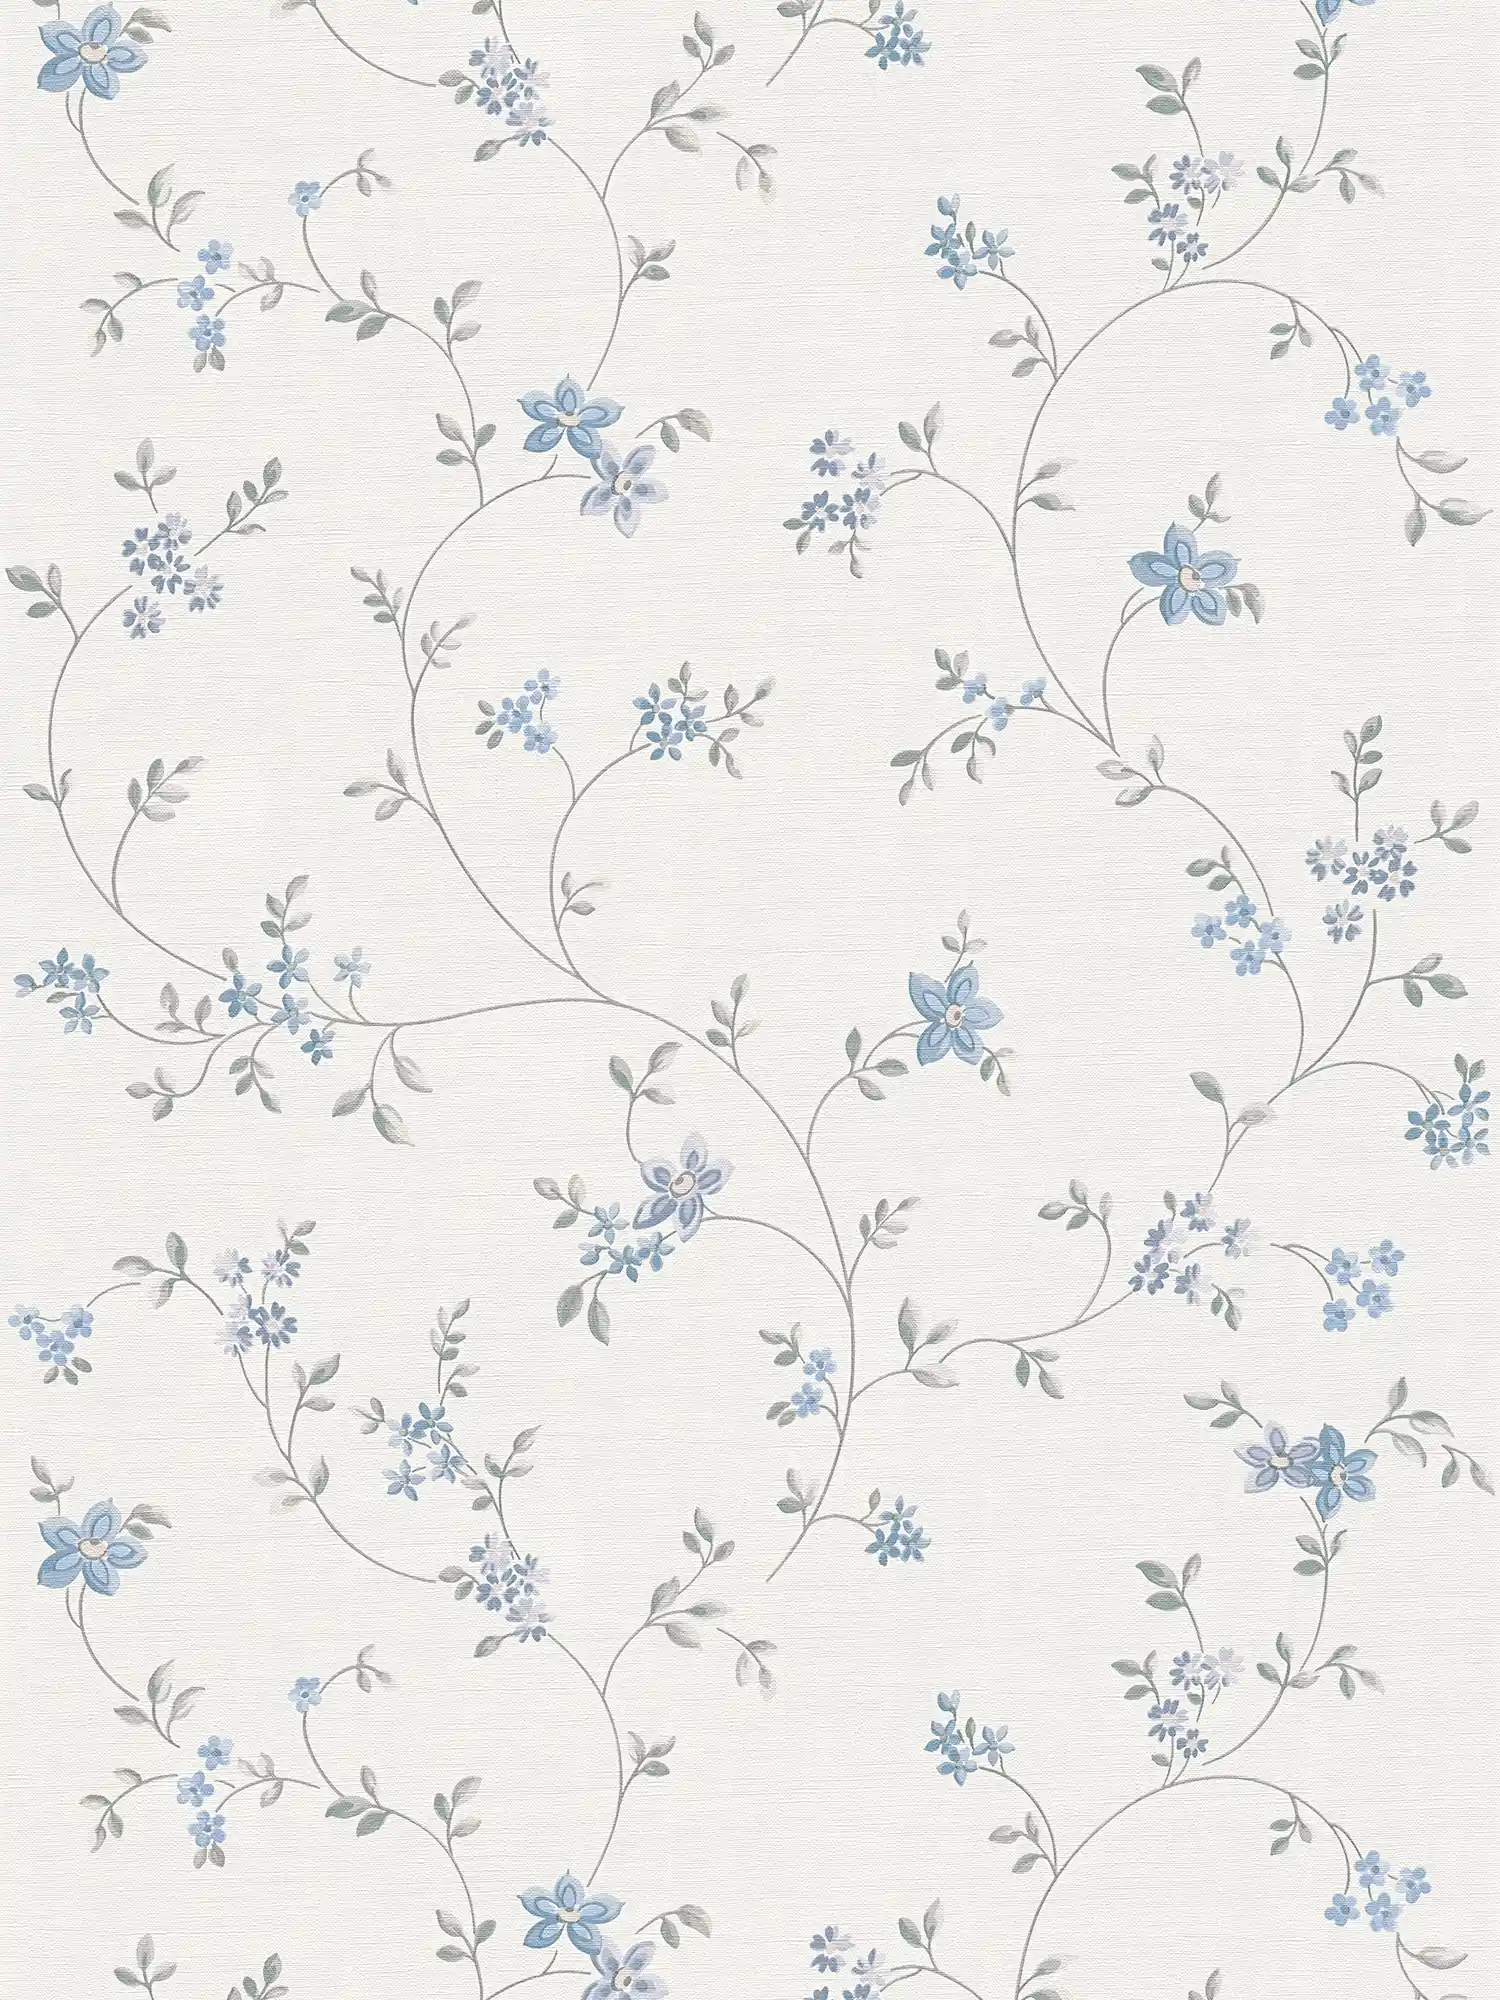         Non-woven wallpaper with floral vines in country style - cream, grey, blue
    